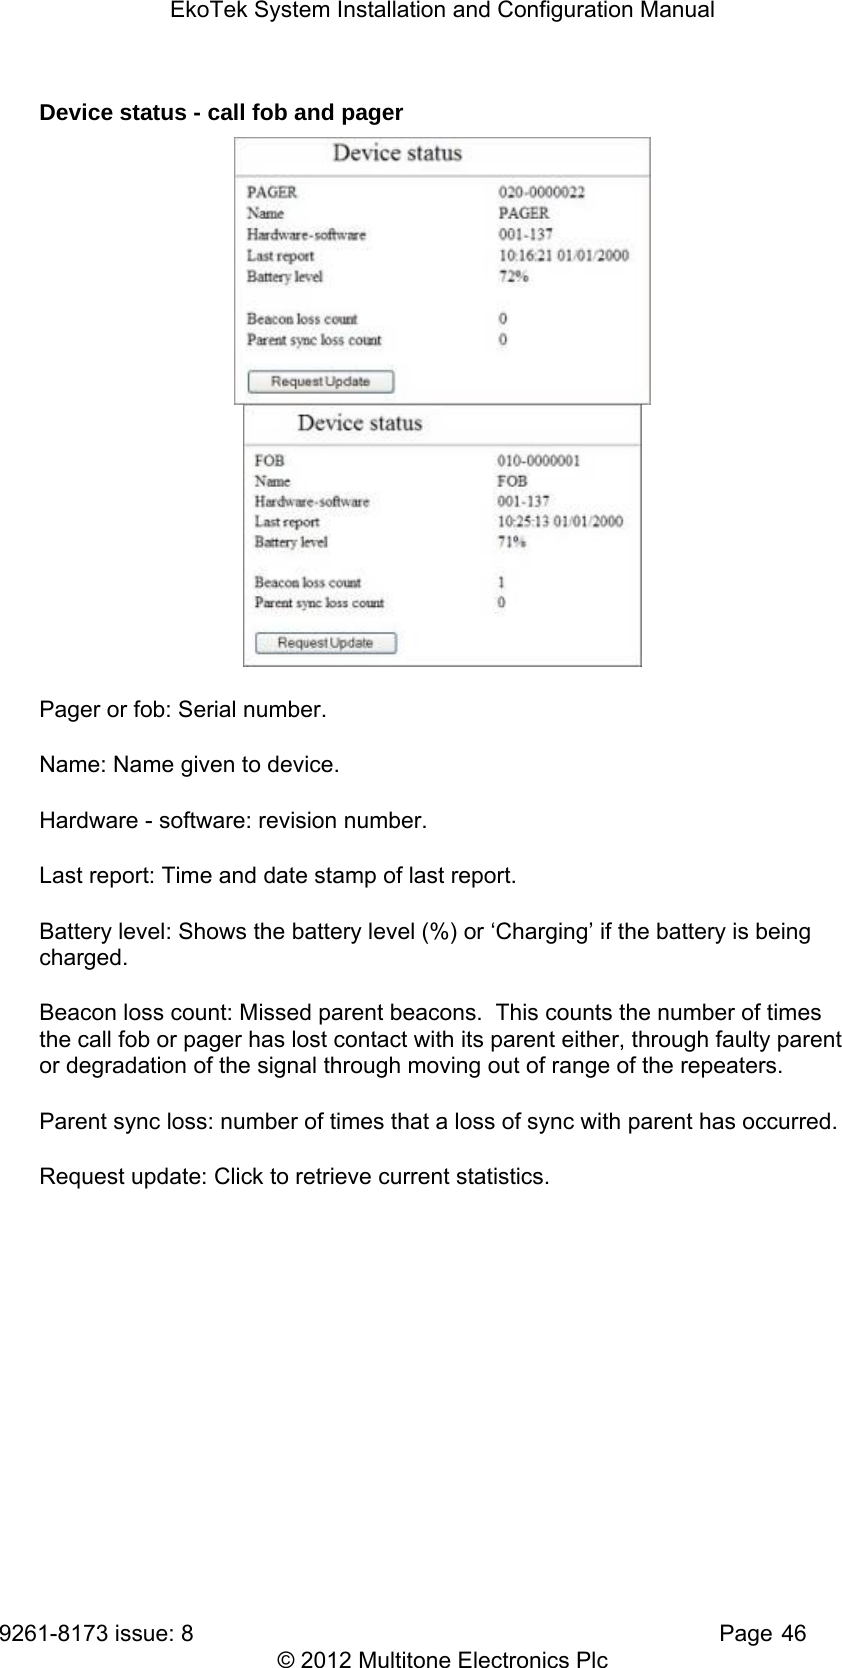 EkoTek System Installation and Configuration Manual 9261-8173 issue: 8   Page 46 © 2012 Multitone Electronics Plc Device status - call fob and pager   Pager or fob: Serial number. Name: Name given to device. Hardware - software: revision number. Last report: Time and date stamp of last report. Battery level: Shows the battery level (%) or ‘Charging’ if the battery is being charged. Beacon loss count: Missed parent beacons.  This counts the number of times the call fob or pager has lost contact with its parent either, through faulty parent or degradation of the signal through moving out of range of the repeaters. Parent sync loss: number of times that a loss of sync with parent has occurred. Request update: Click to retrieve current statistics.  